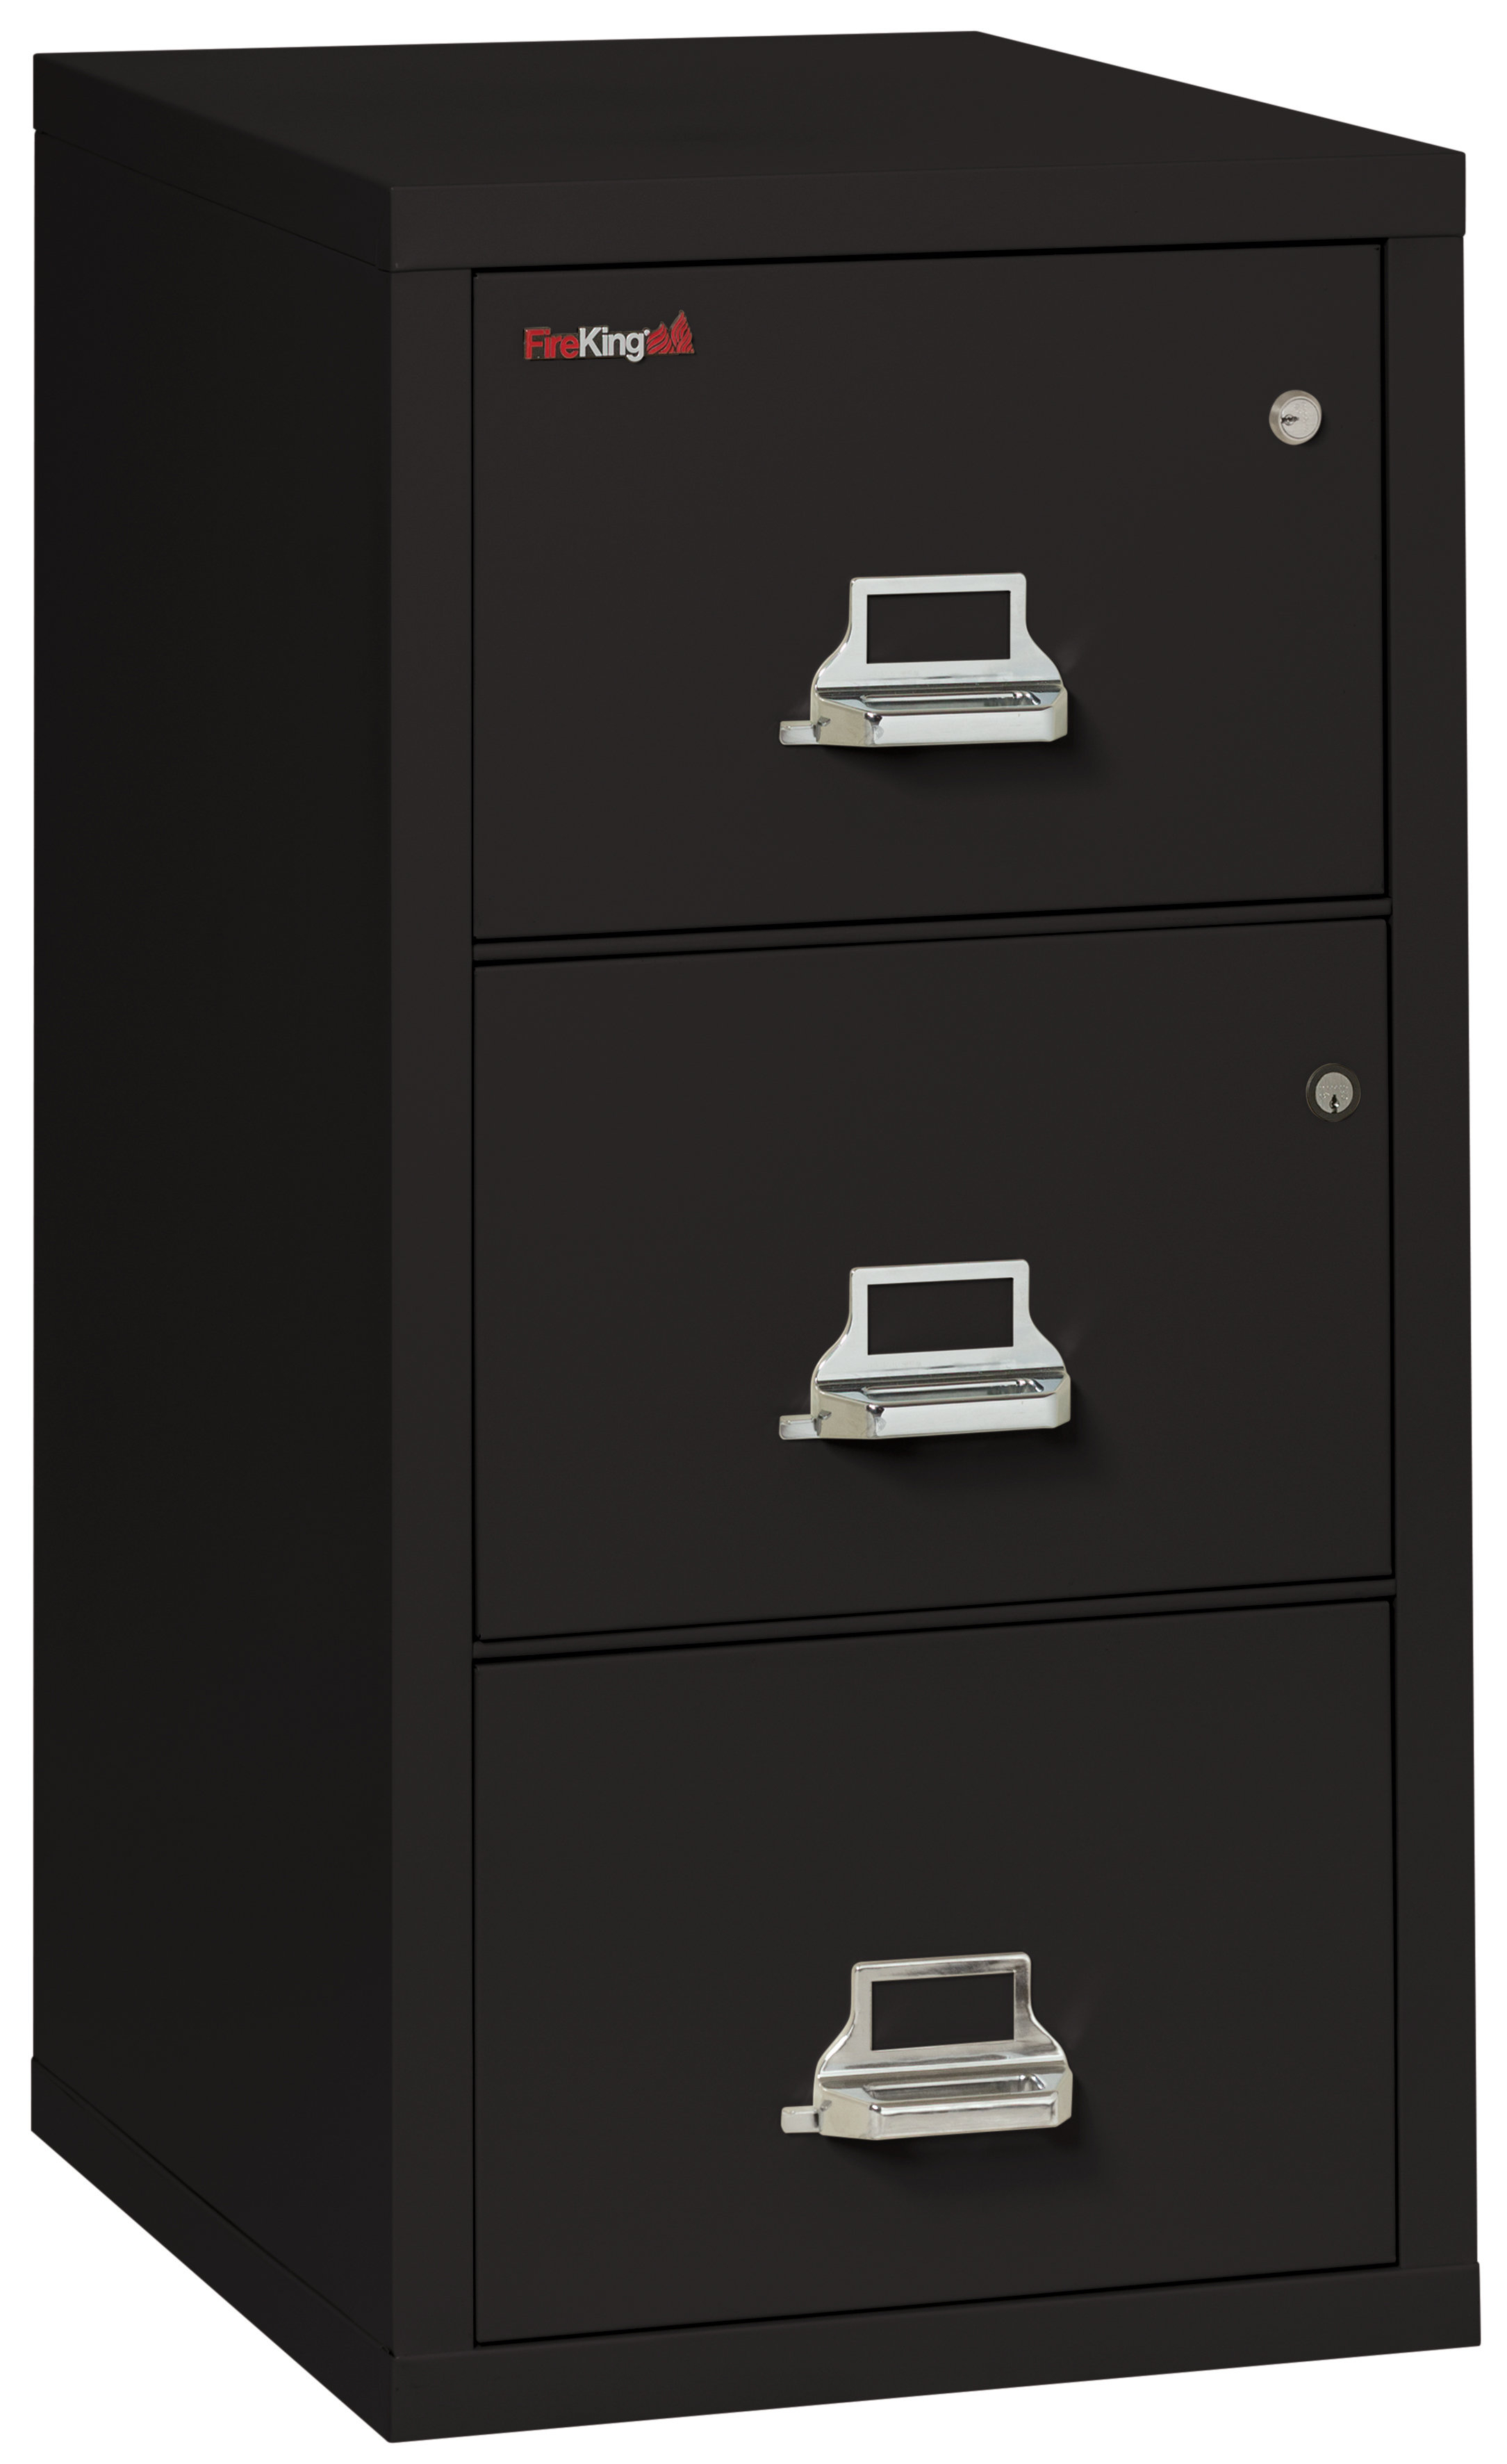 Fireking Legal Safe In A File Fireproof 3 Drawer Vertical File with regard to size 2169 X 3546